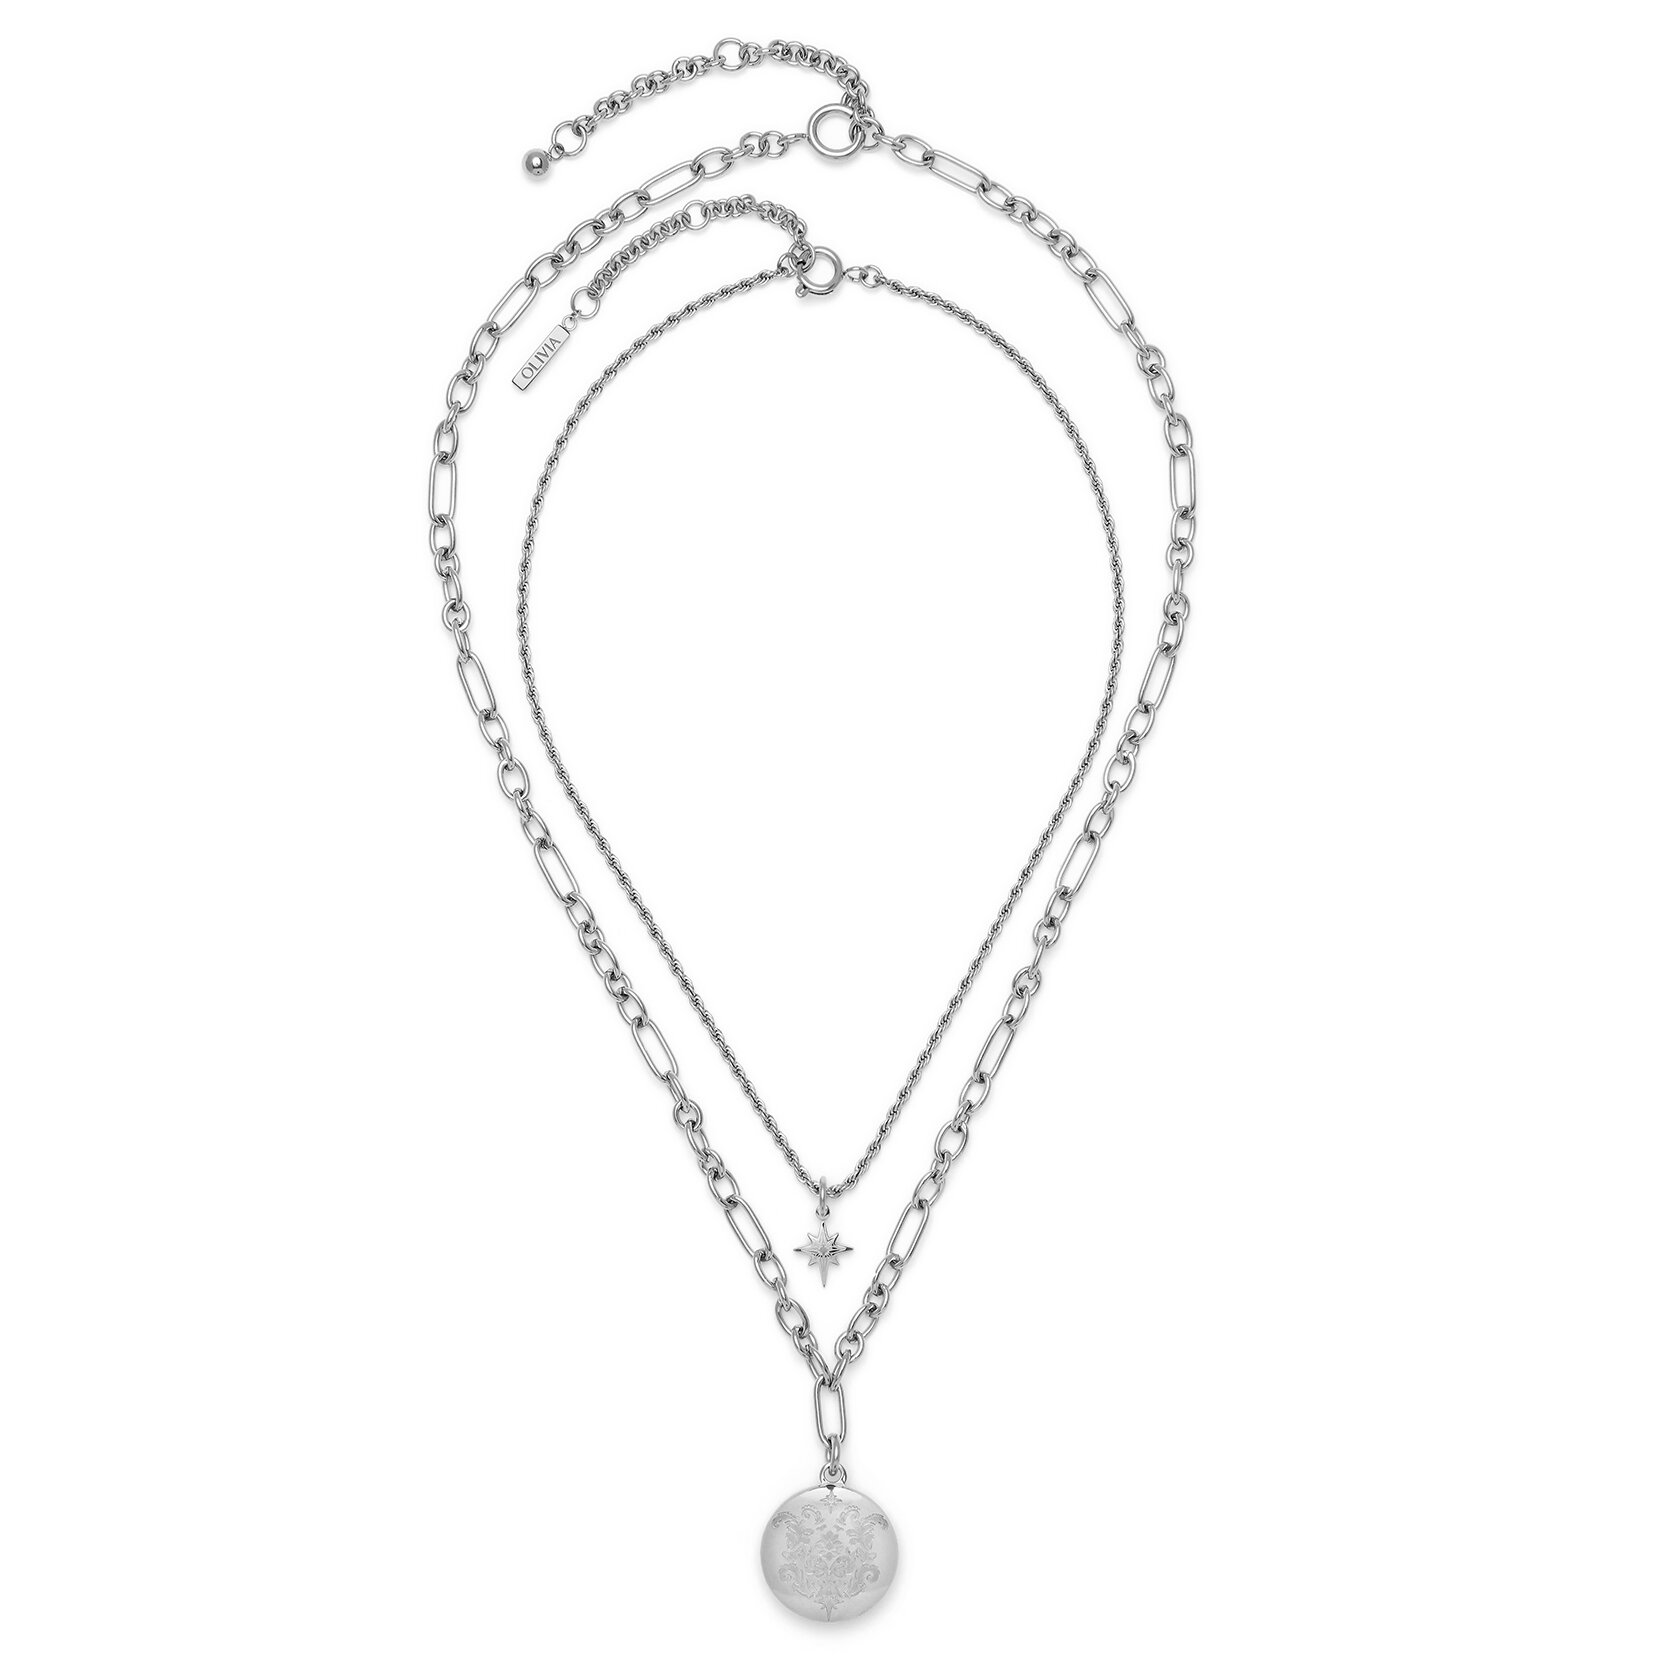 Ever Stacked Silver Tone Multi-Chain Necklace